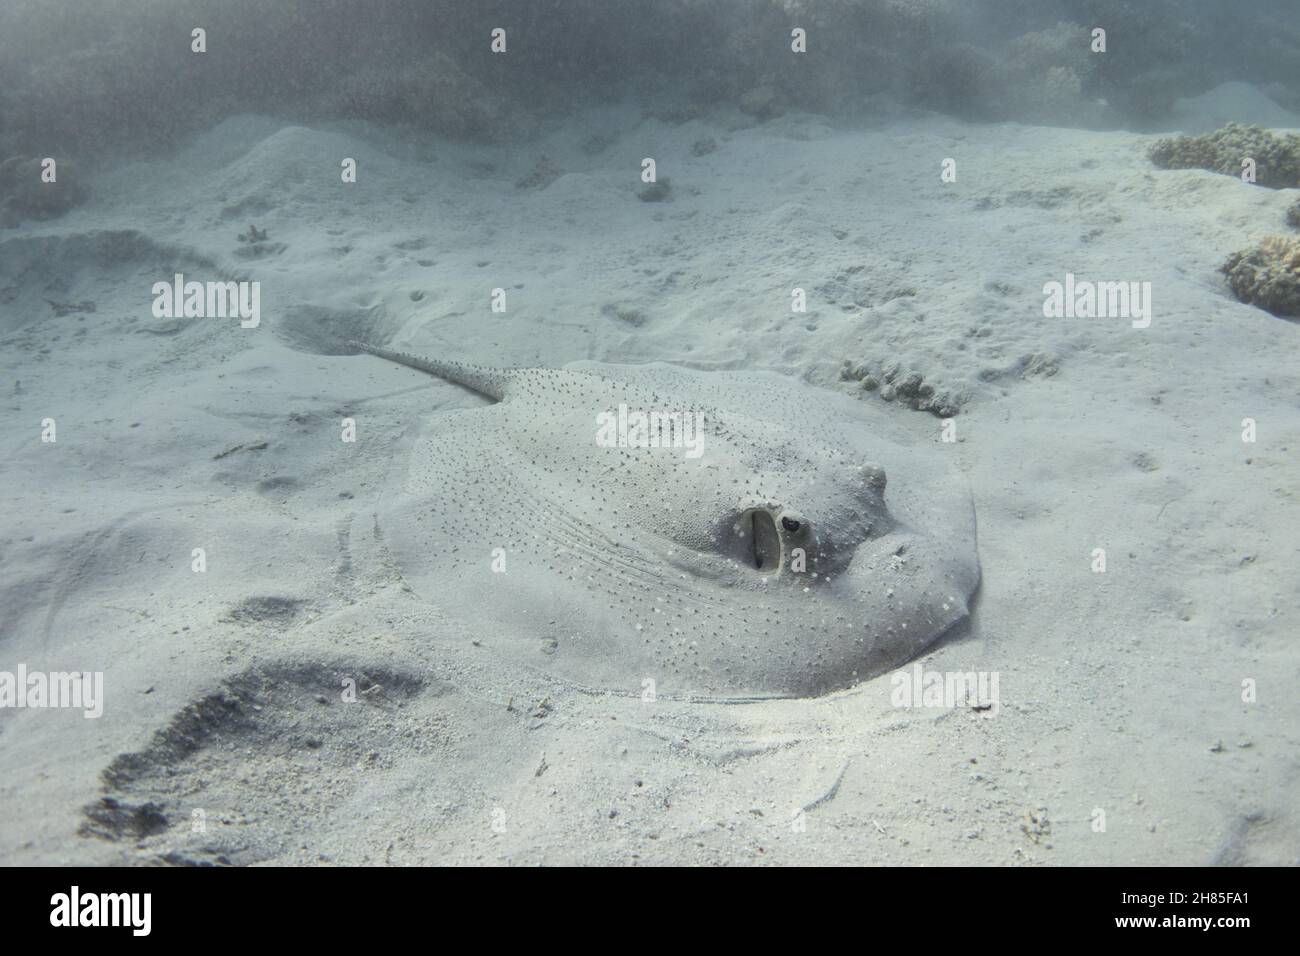 Porcupine ray (Urogymnus asperrimus) on the ocean floor underwater. Rare stingray, also known as Porcupine whipray  or Thorny ray. Stock Photo